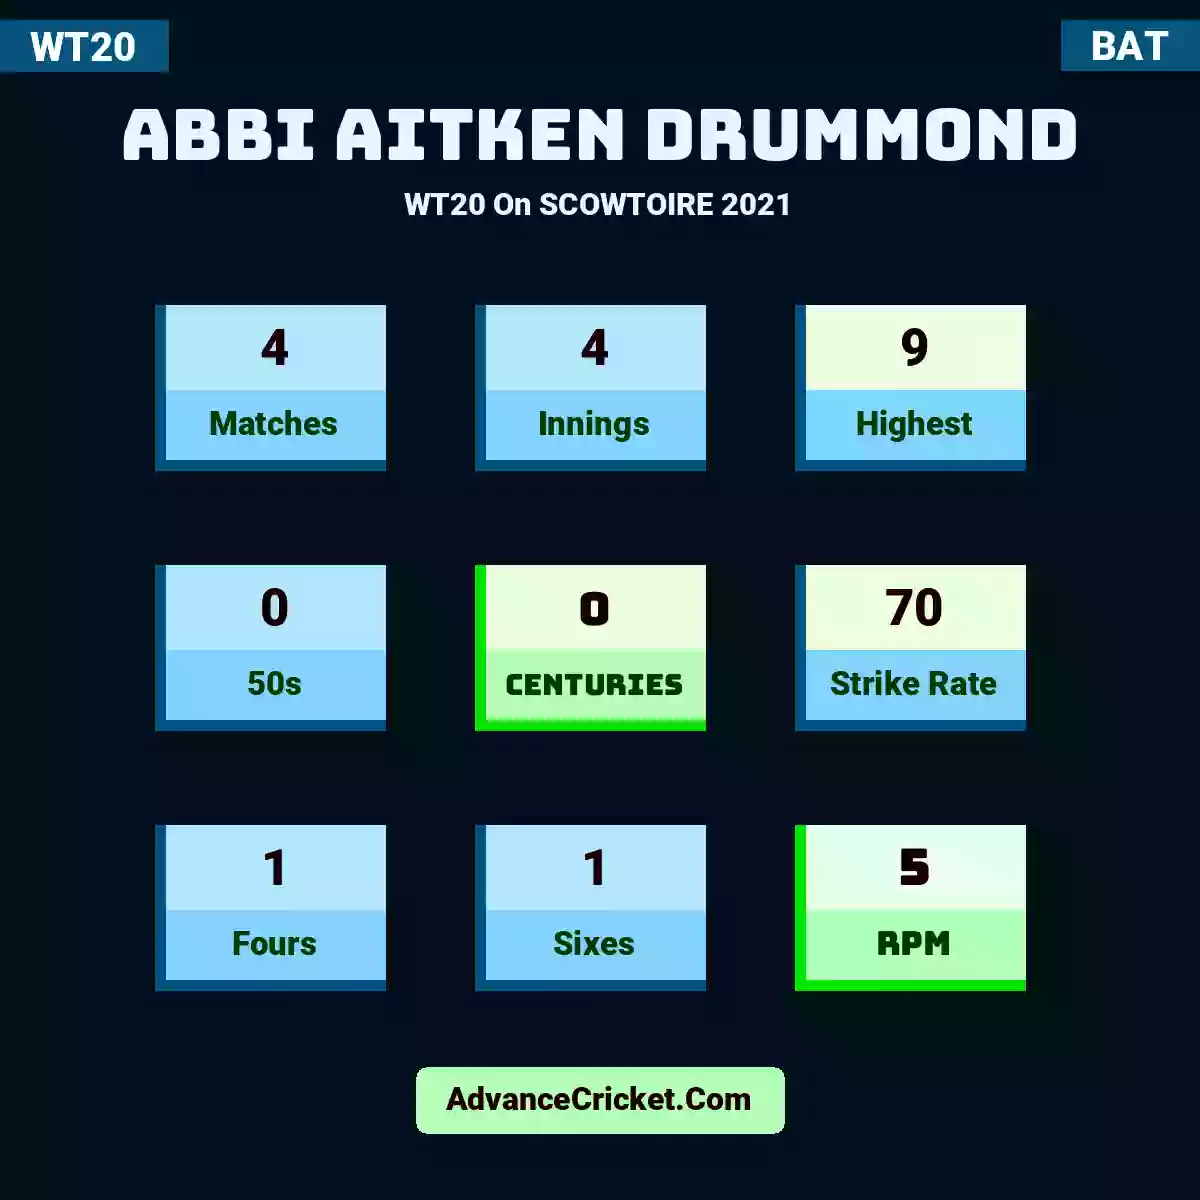 Abbi Aitken Drummond WT20  On SCOWTOIRE 2021, Abbi Aitken Drummond played 4 matches, scored 9 runs as highest, 0 half-centuries, and 0 centuries, with a strike rate of 70. A.Drummond hit 1 fours and 1 sixes, with an RPM of 5.